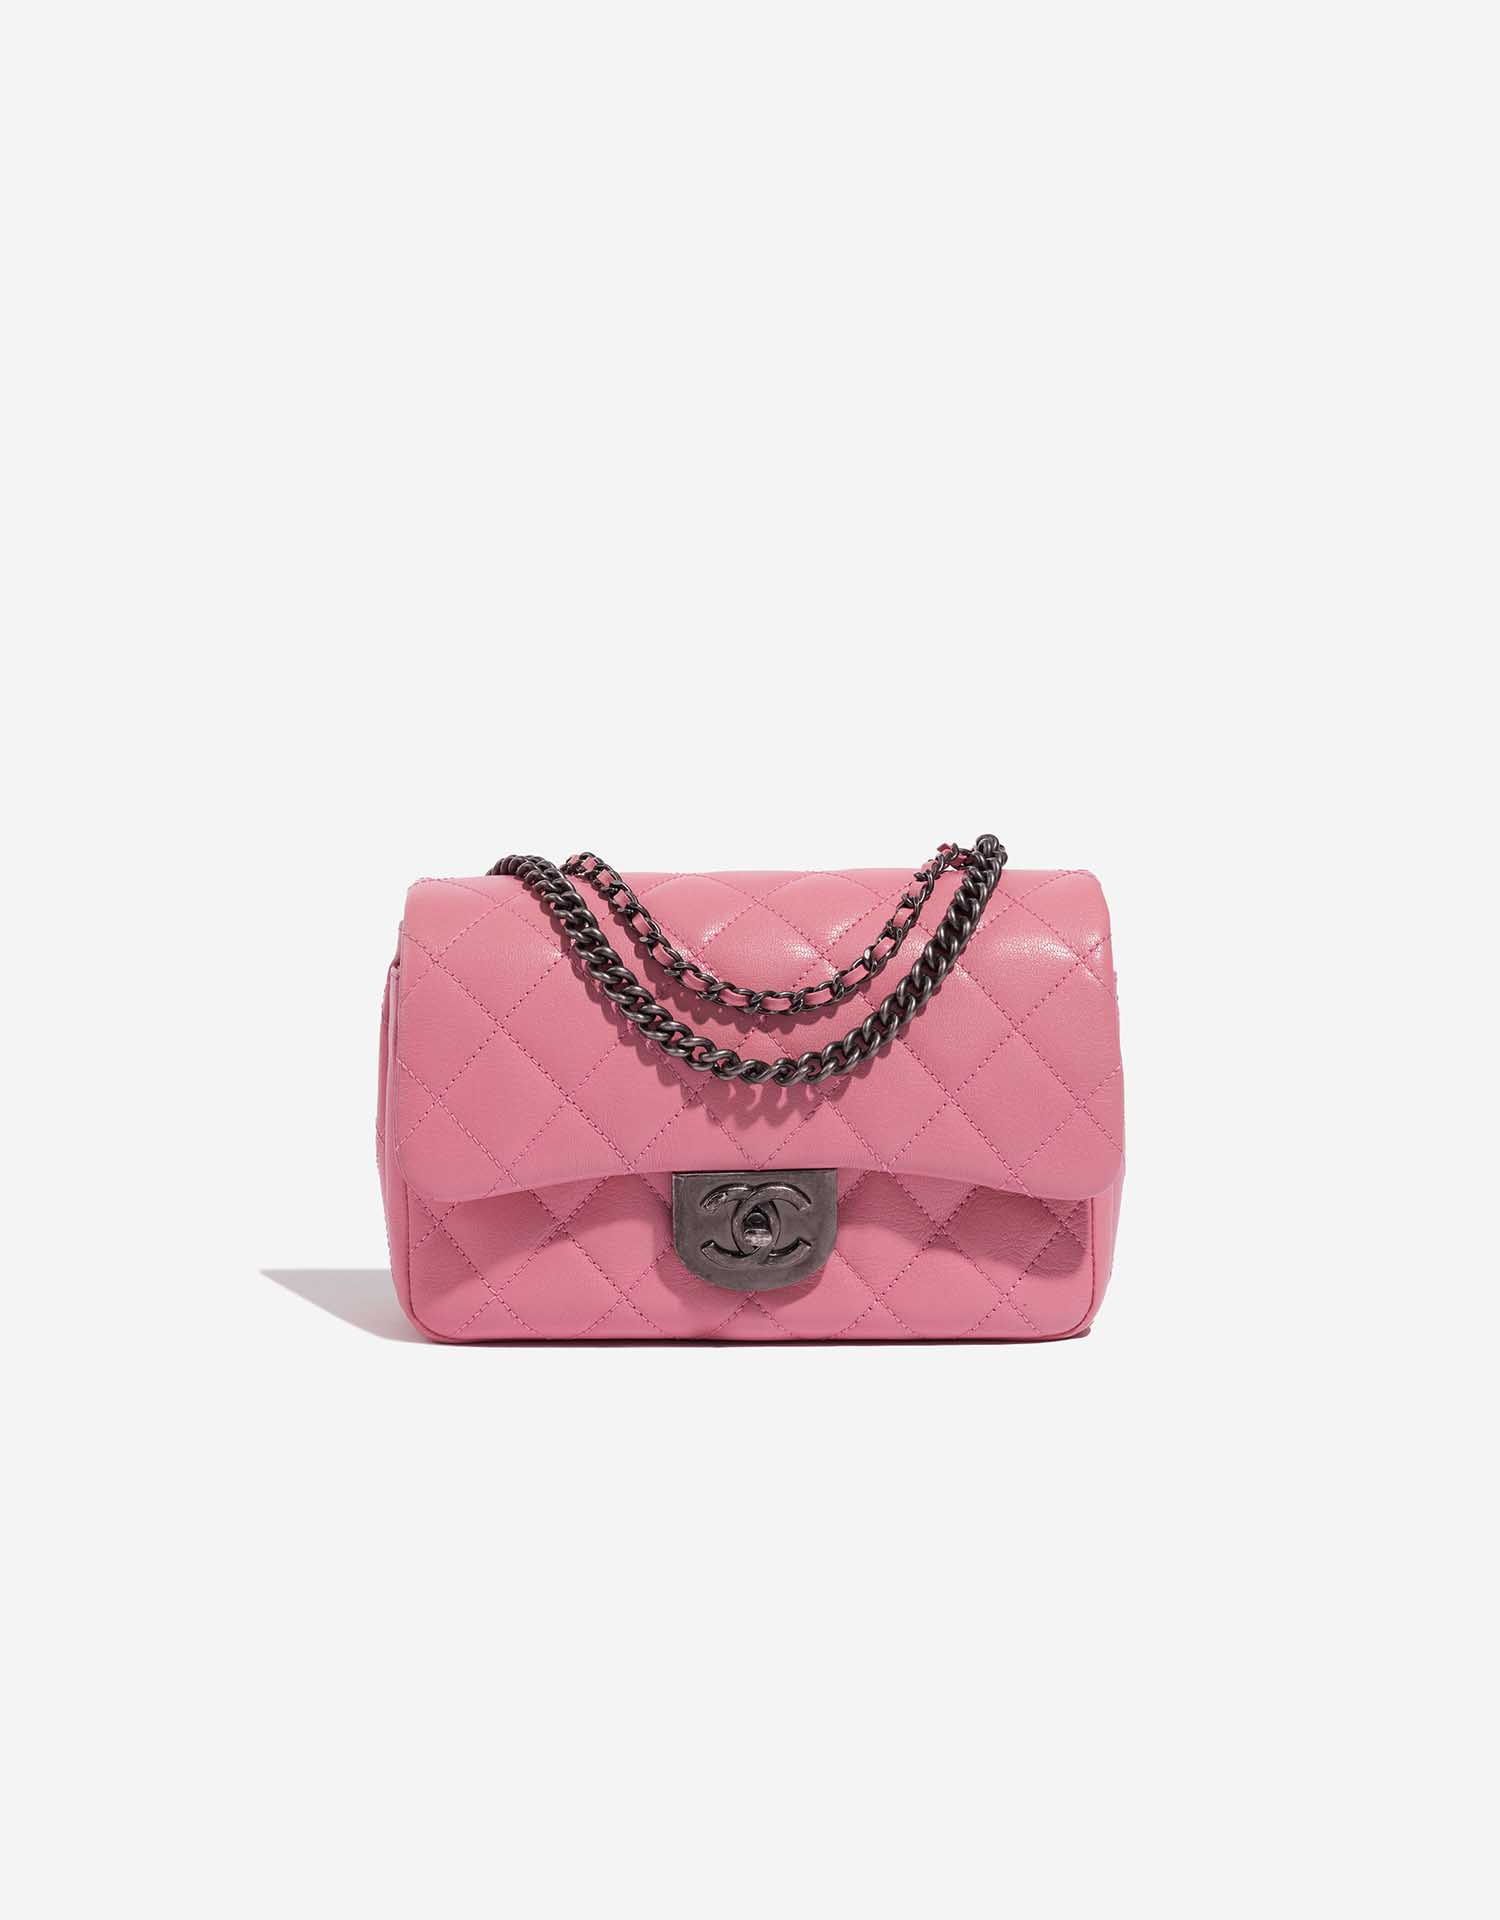 Timeless CHANEL CLASSIC FLAP BAG CROSSBODY BAG IN AMARANTE QUILTED